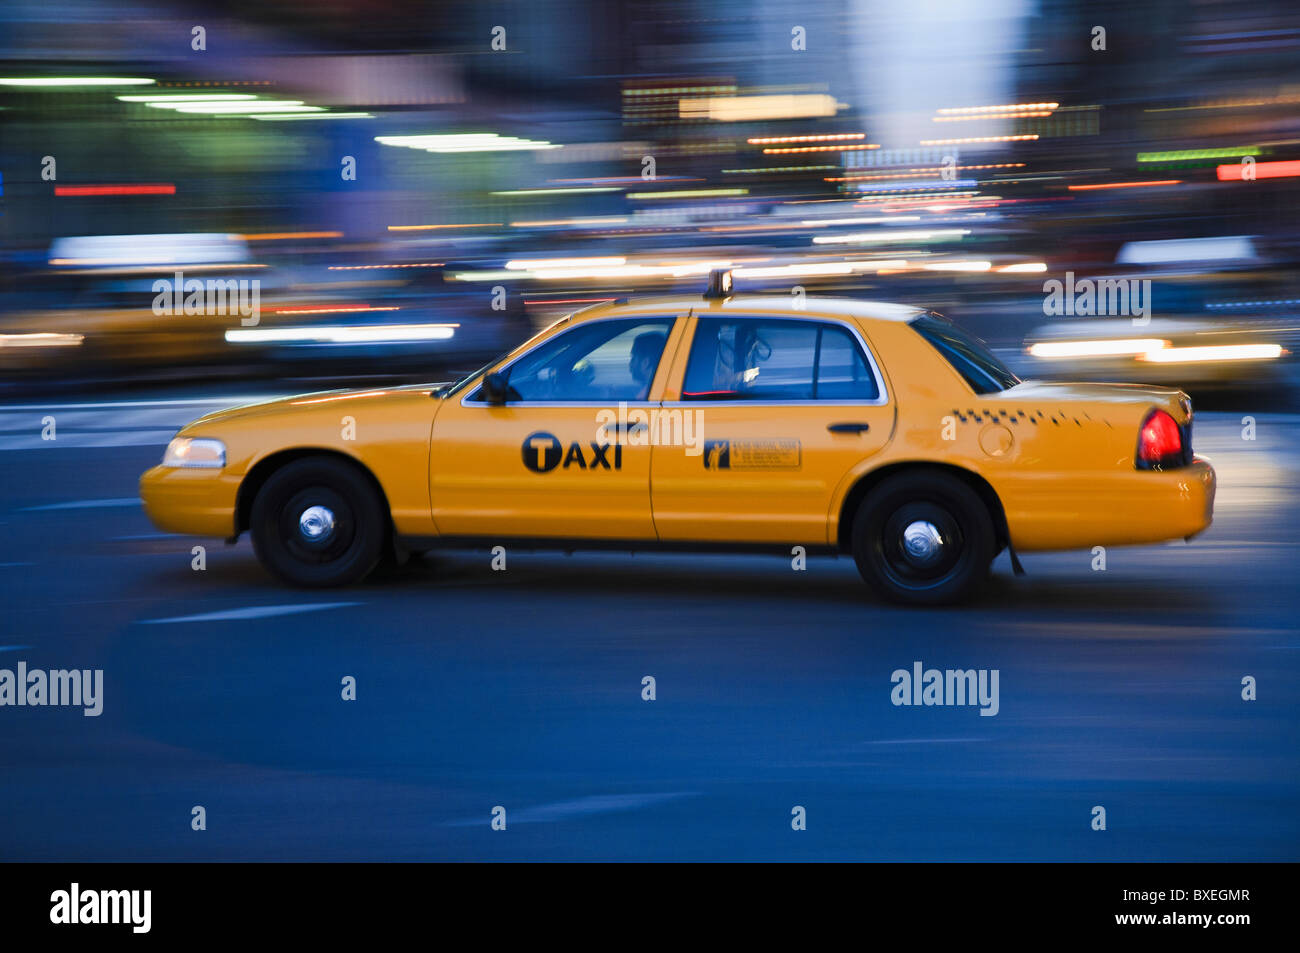 Taxi cab driving in the evening Stock Photo